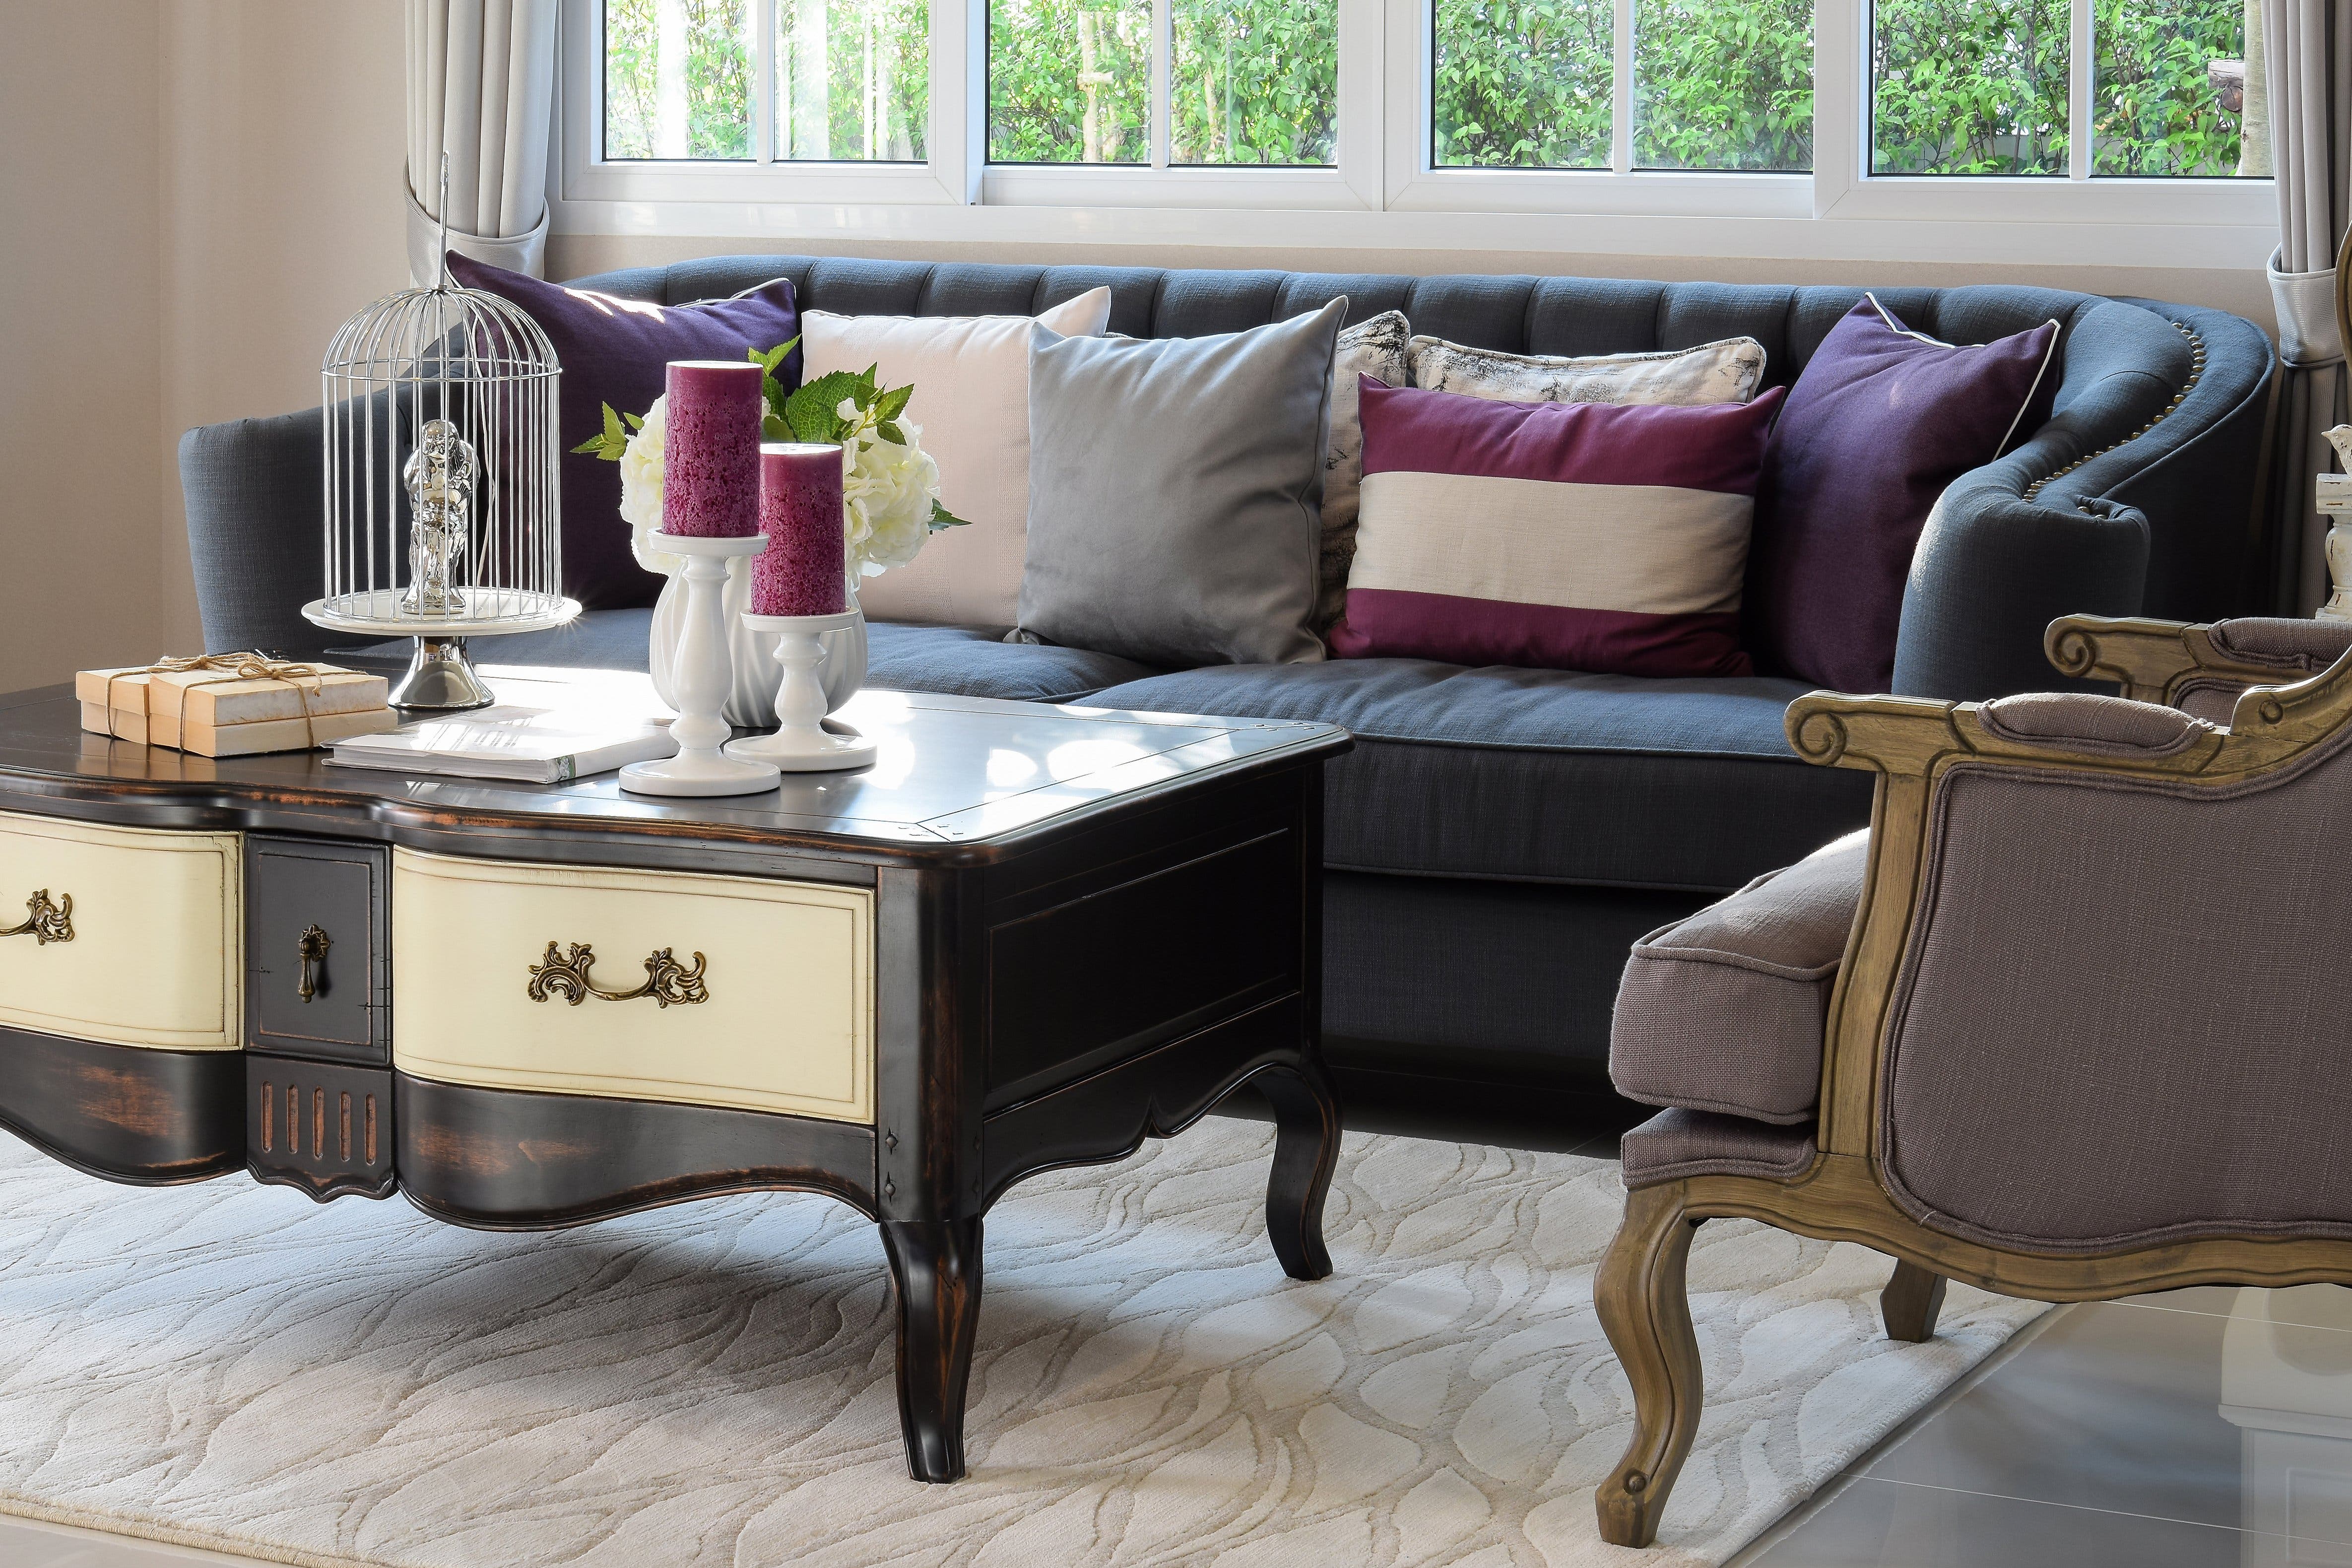 Living area with ultra-violet touches in throw pillows and candles. 